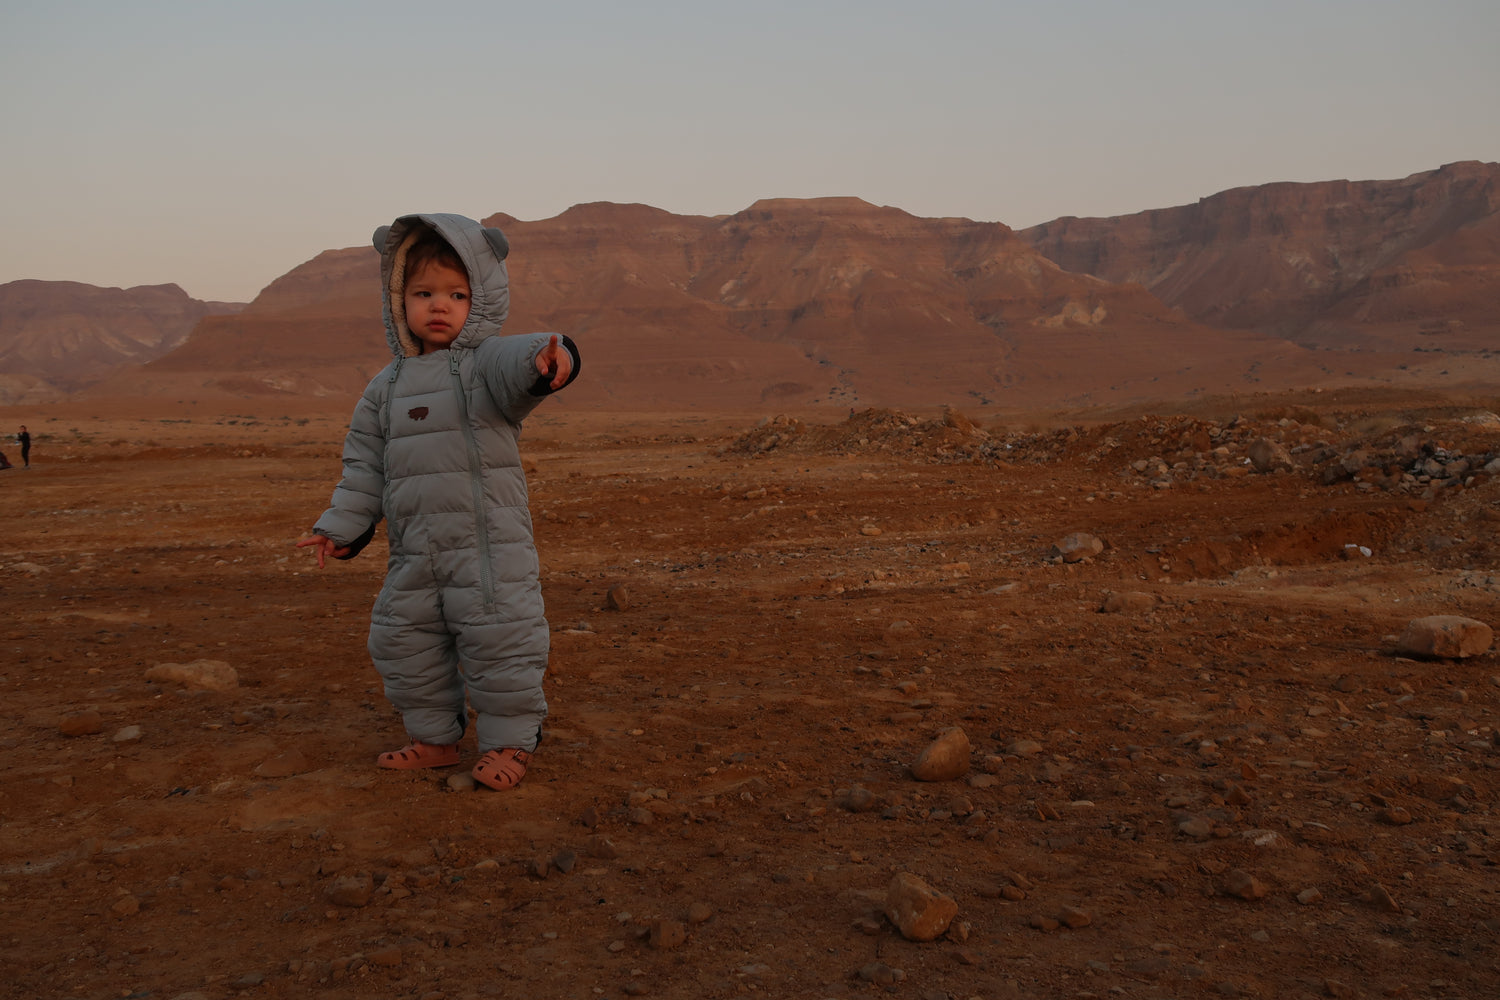 Bex Band | Travels in the Negev Desert